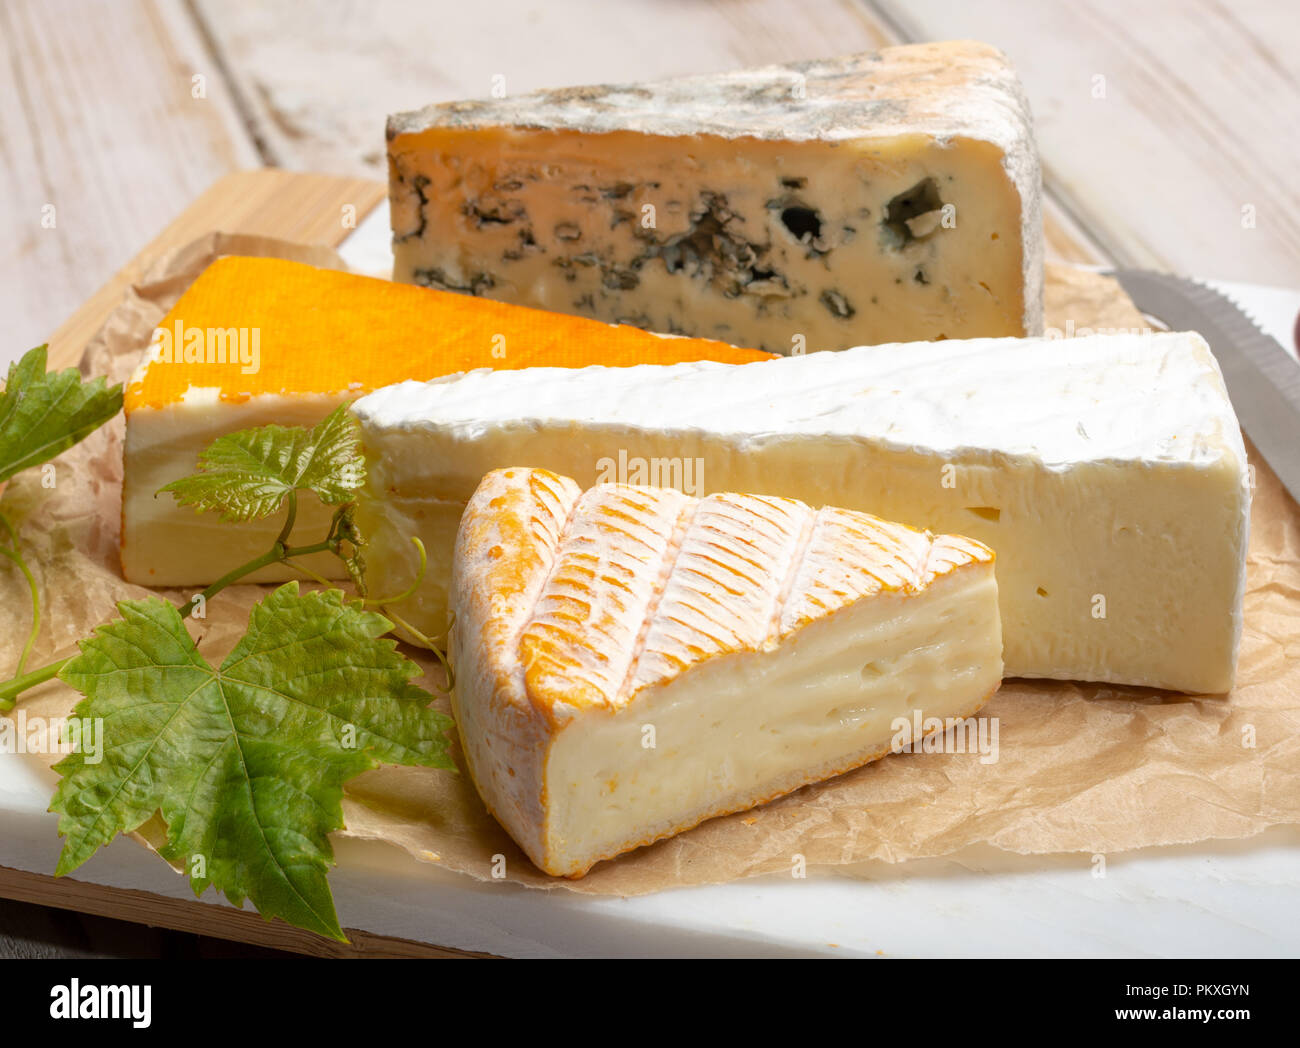 Tasting plate with four France cheeses, cream brie, marcaire, saint paulin and blue auvergne cheese, served with fresh ripe grapes close up Stock Photo